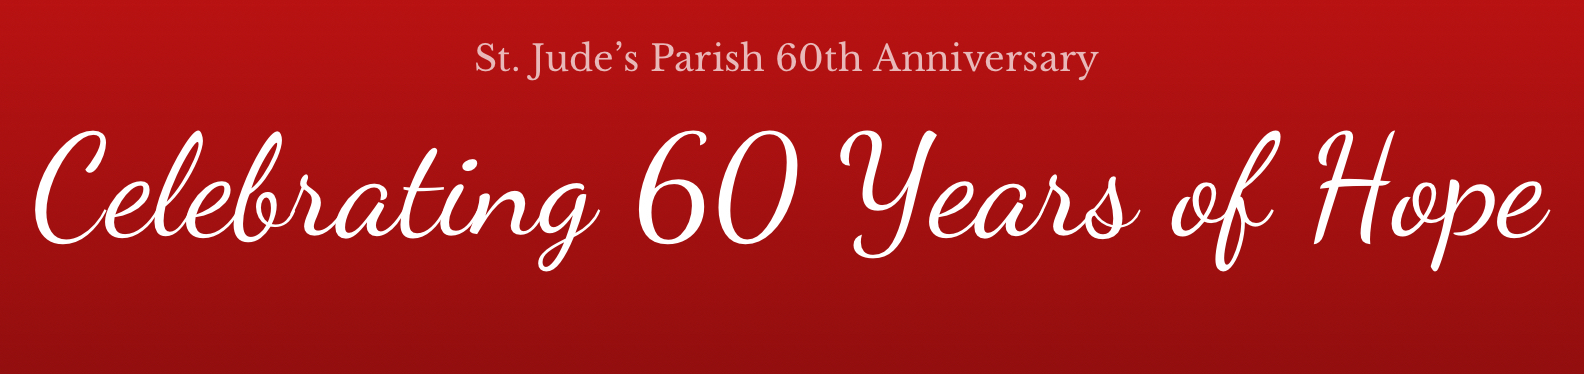 A red banner with the words "St. Jude's Parish 60th Anniversary" written in white. Centre text reads "Celebrating 60 Years of Hope" in white.